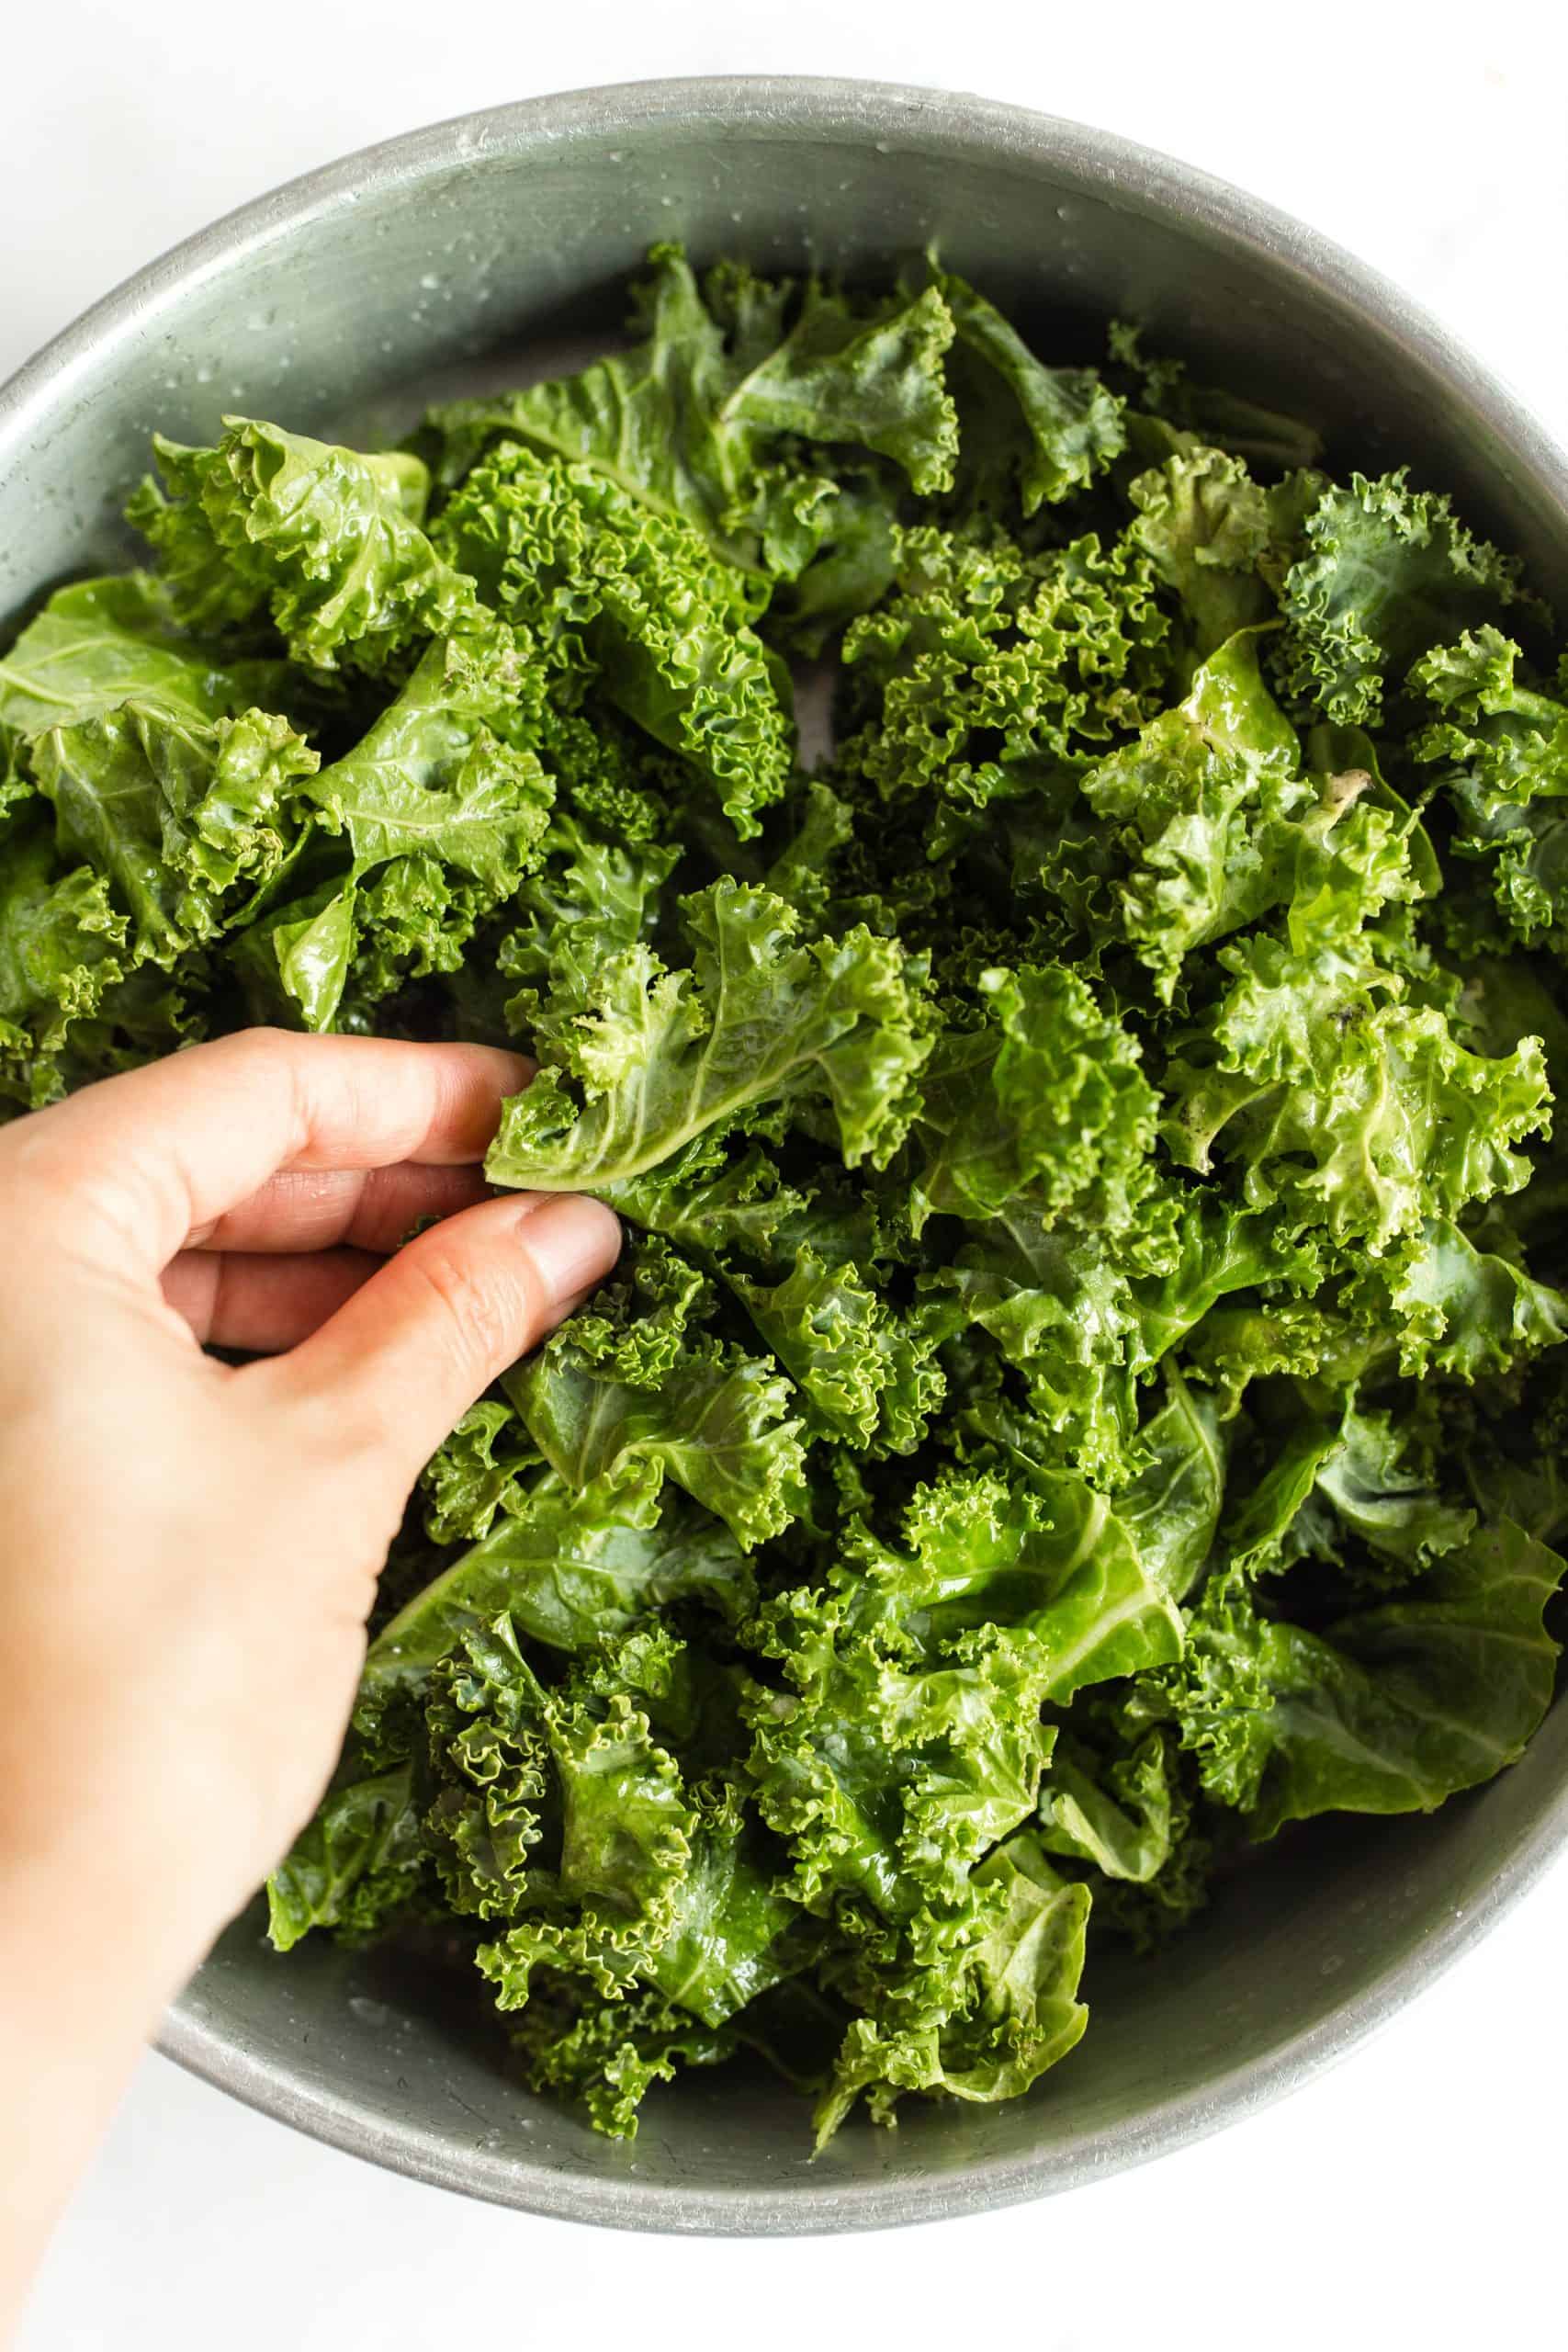 Massaging kale leaves with fingers.